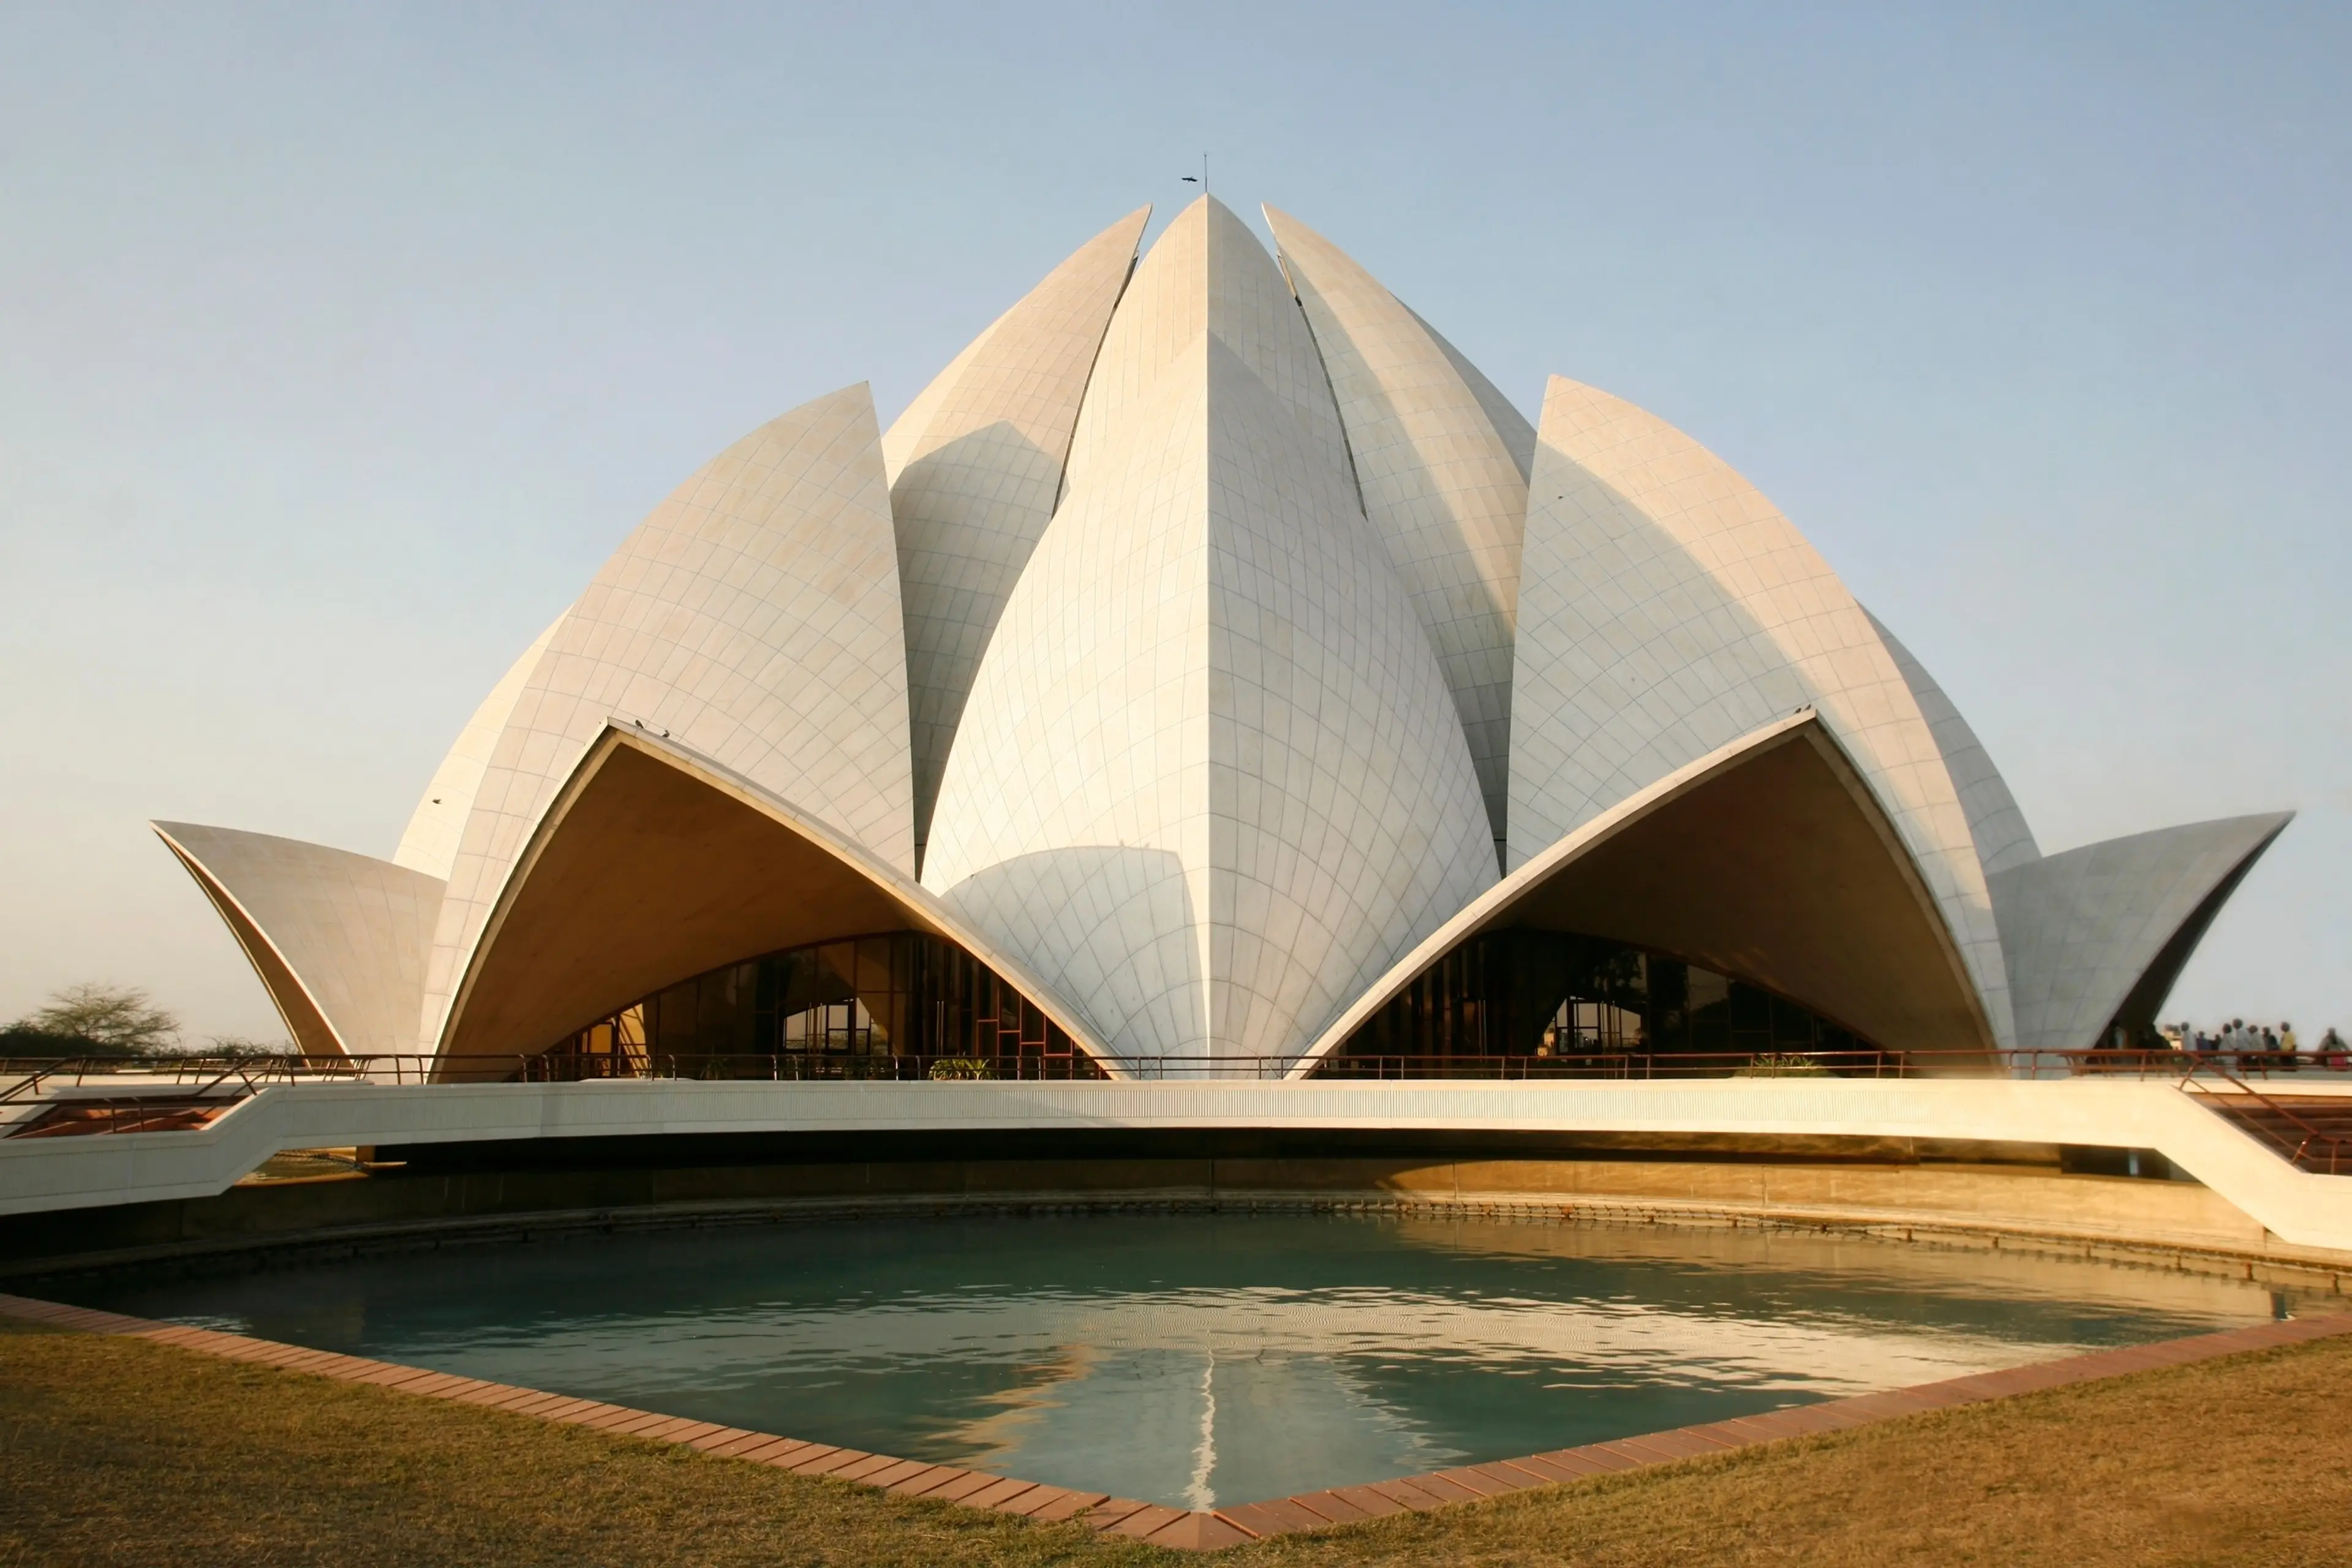 2-Day Family Relaxation and Sightseeing Itinerary in New Delhi